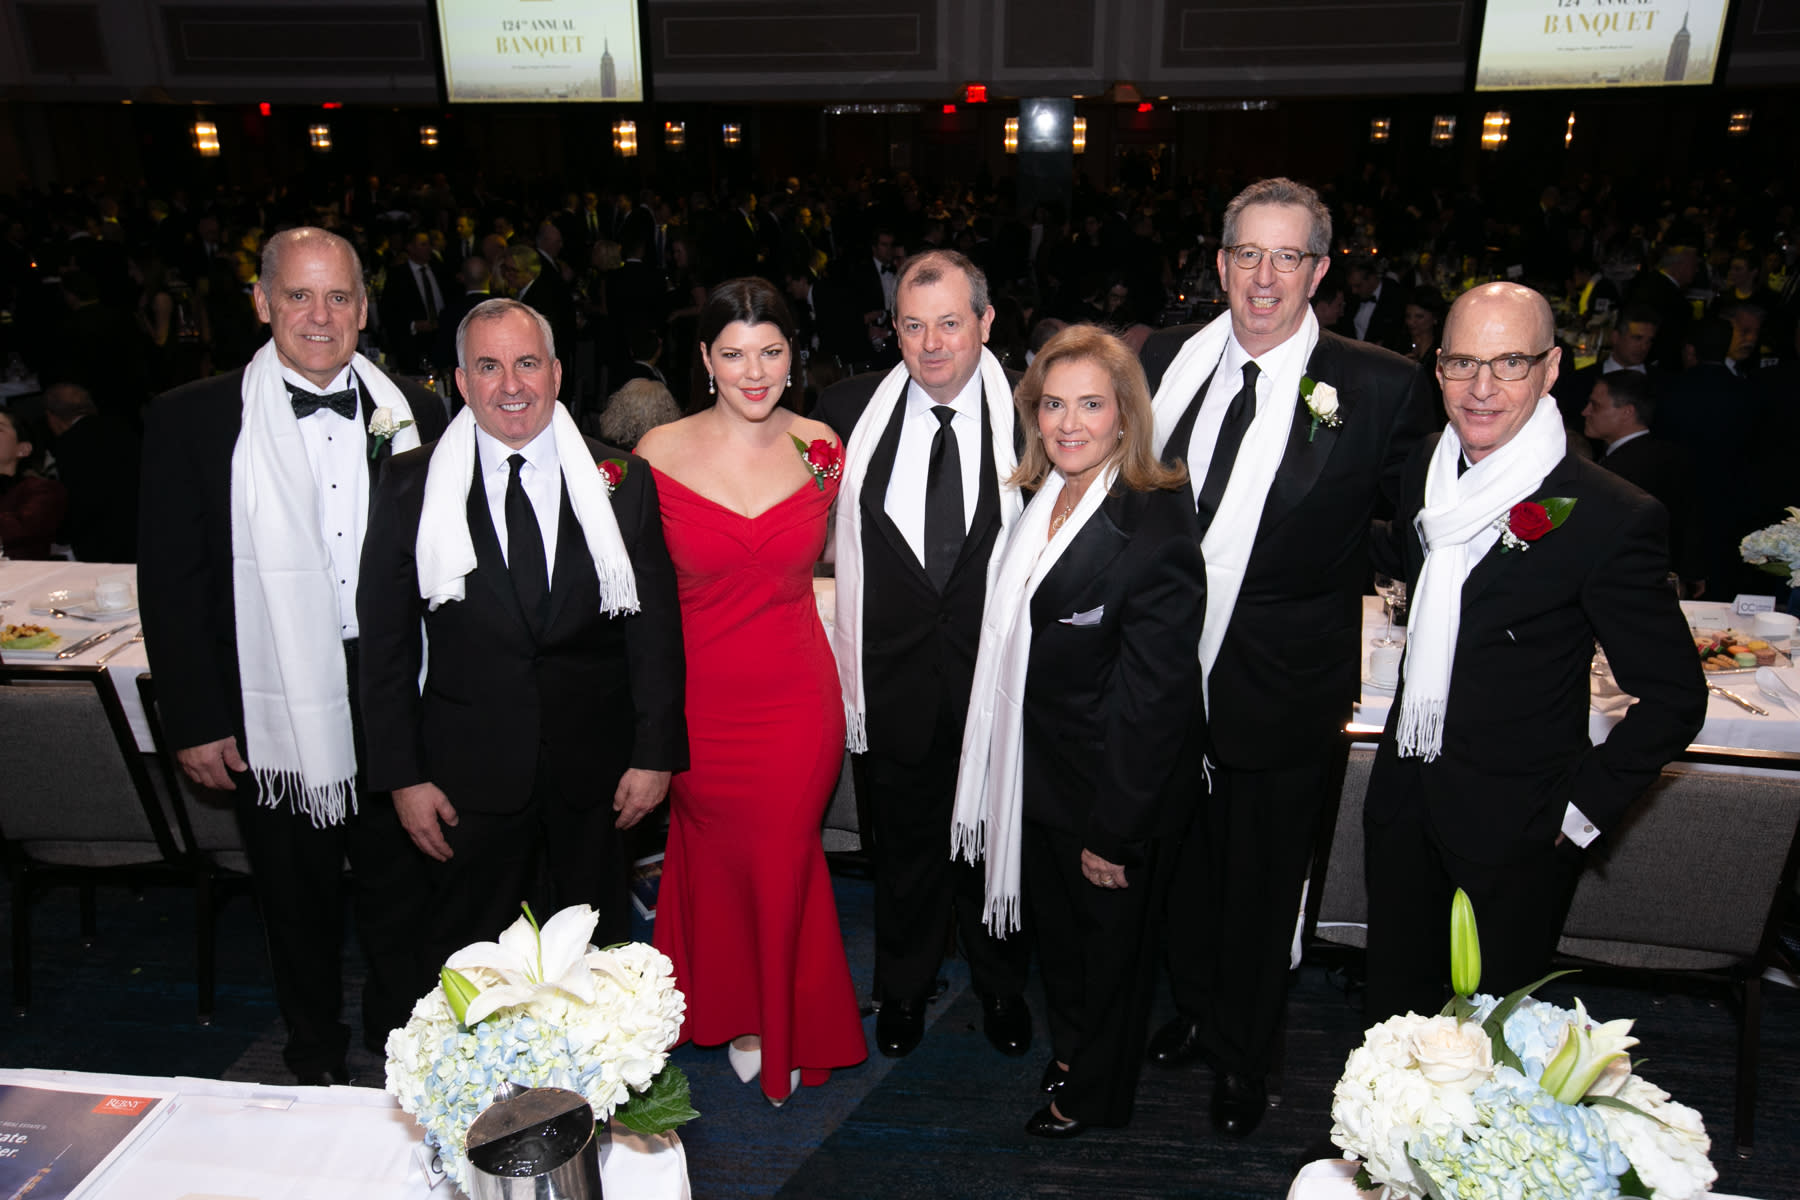 REBNY Celebrates Industry Leaders at 124th Annual Banquet